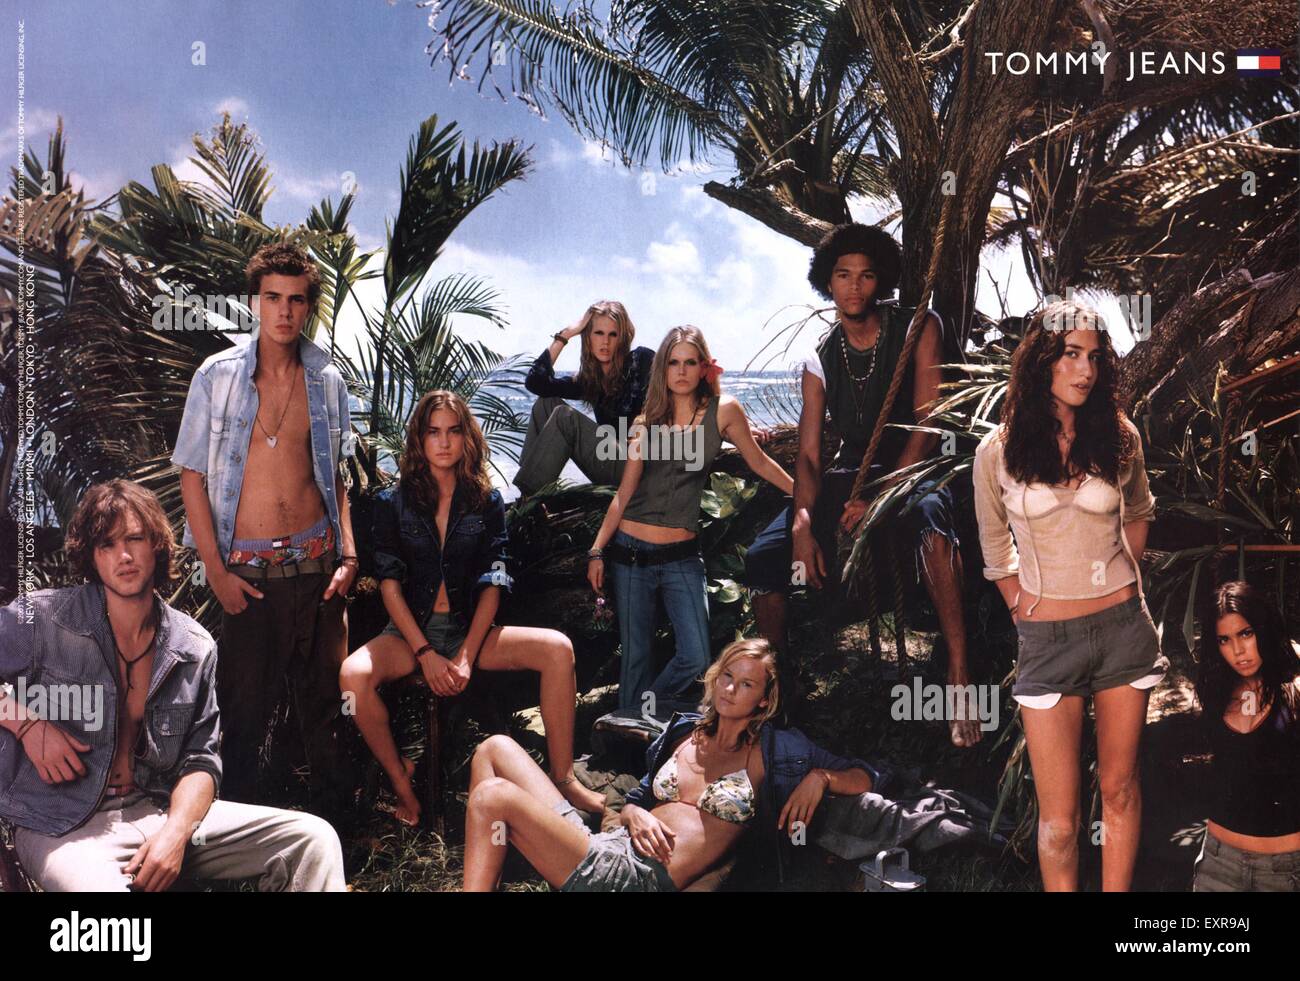 Tommy Jeans High Resolution Stock Photography and Images - Alamy